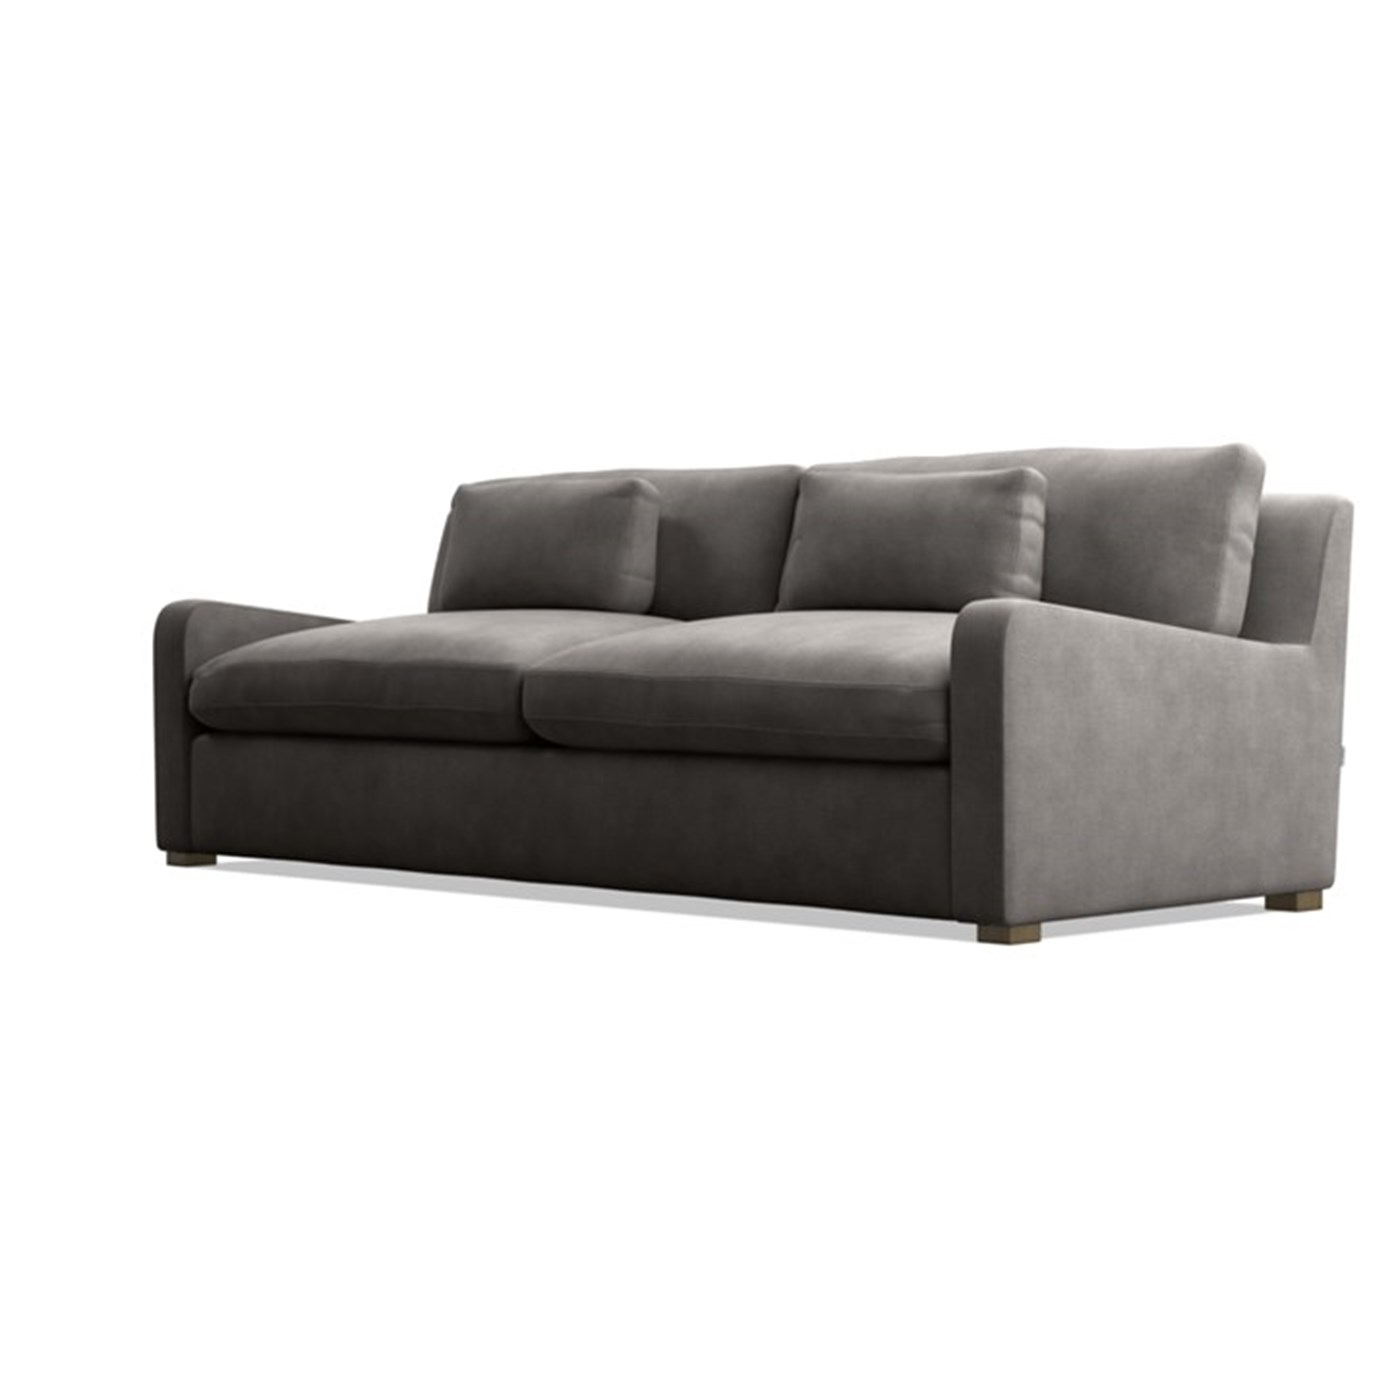 Stratten Slope Arm Sofa Bed